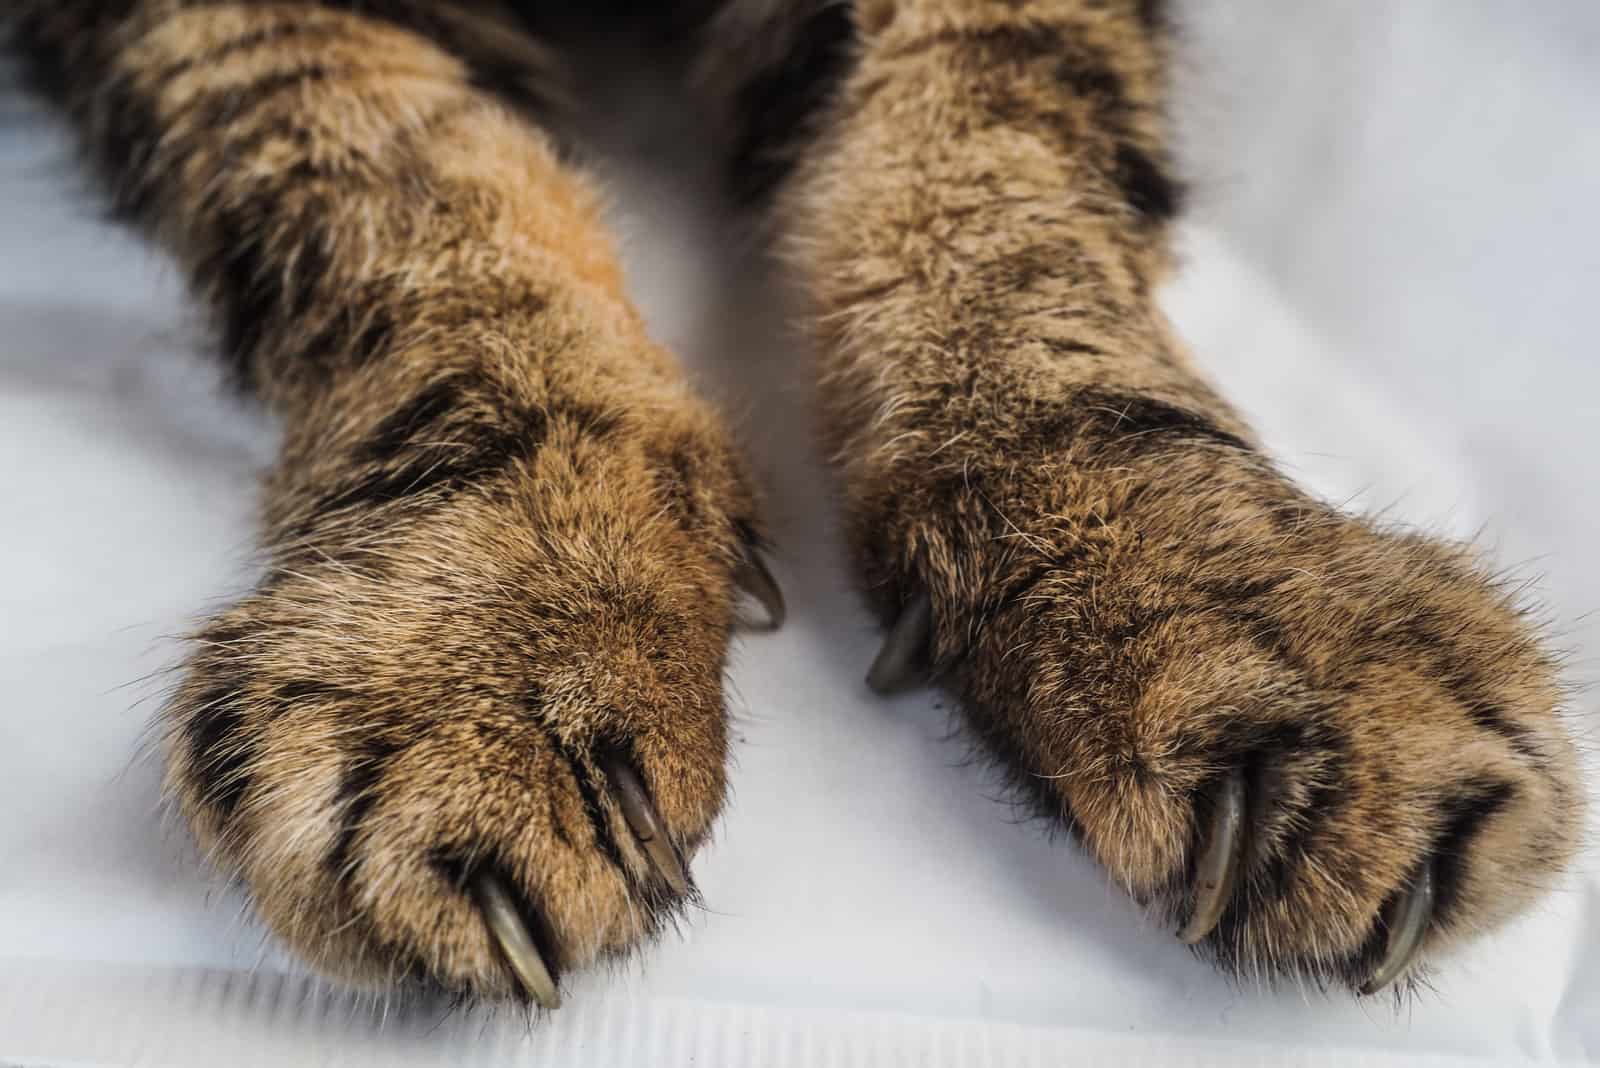 cat's neglected claws